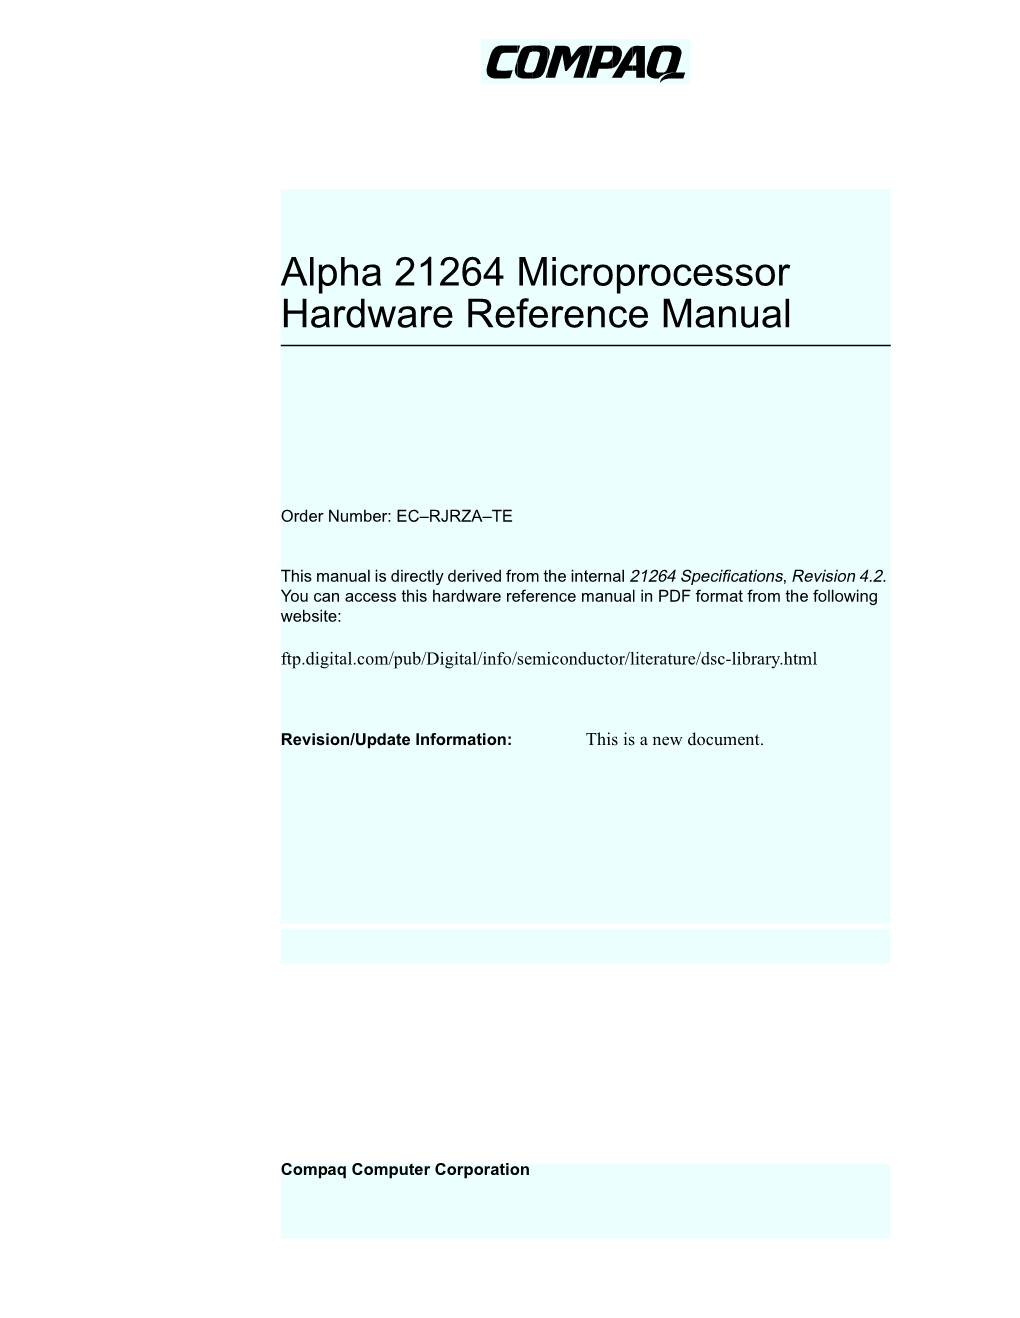 Alpha 21264 Microprocessor Hardware Reference Manual